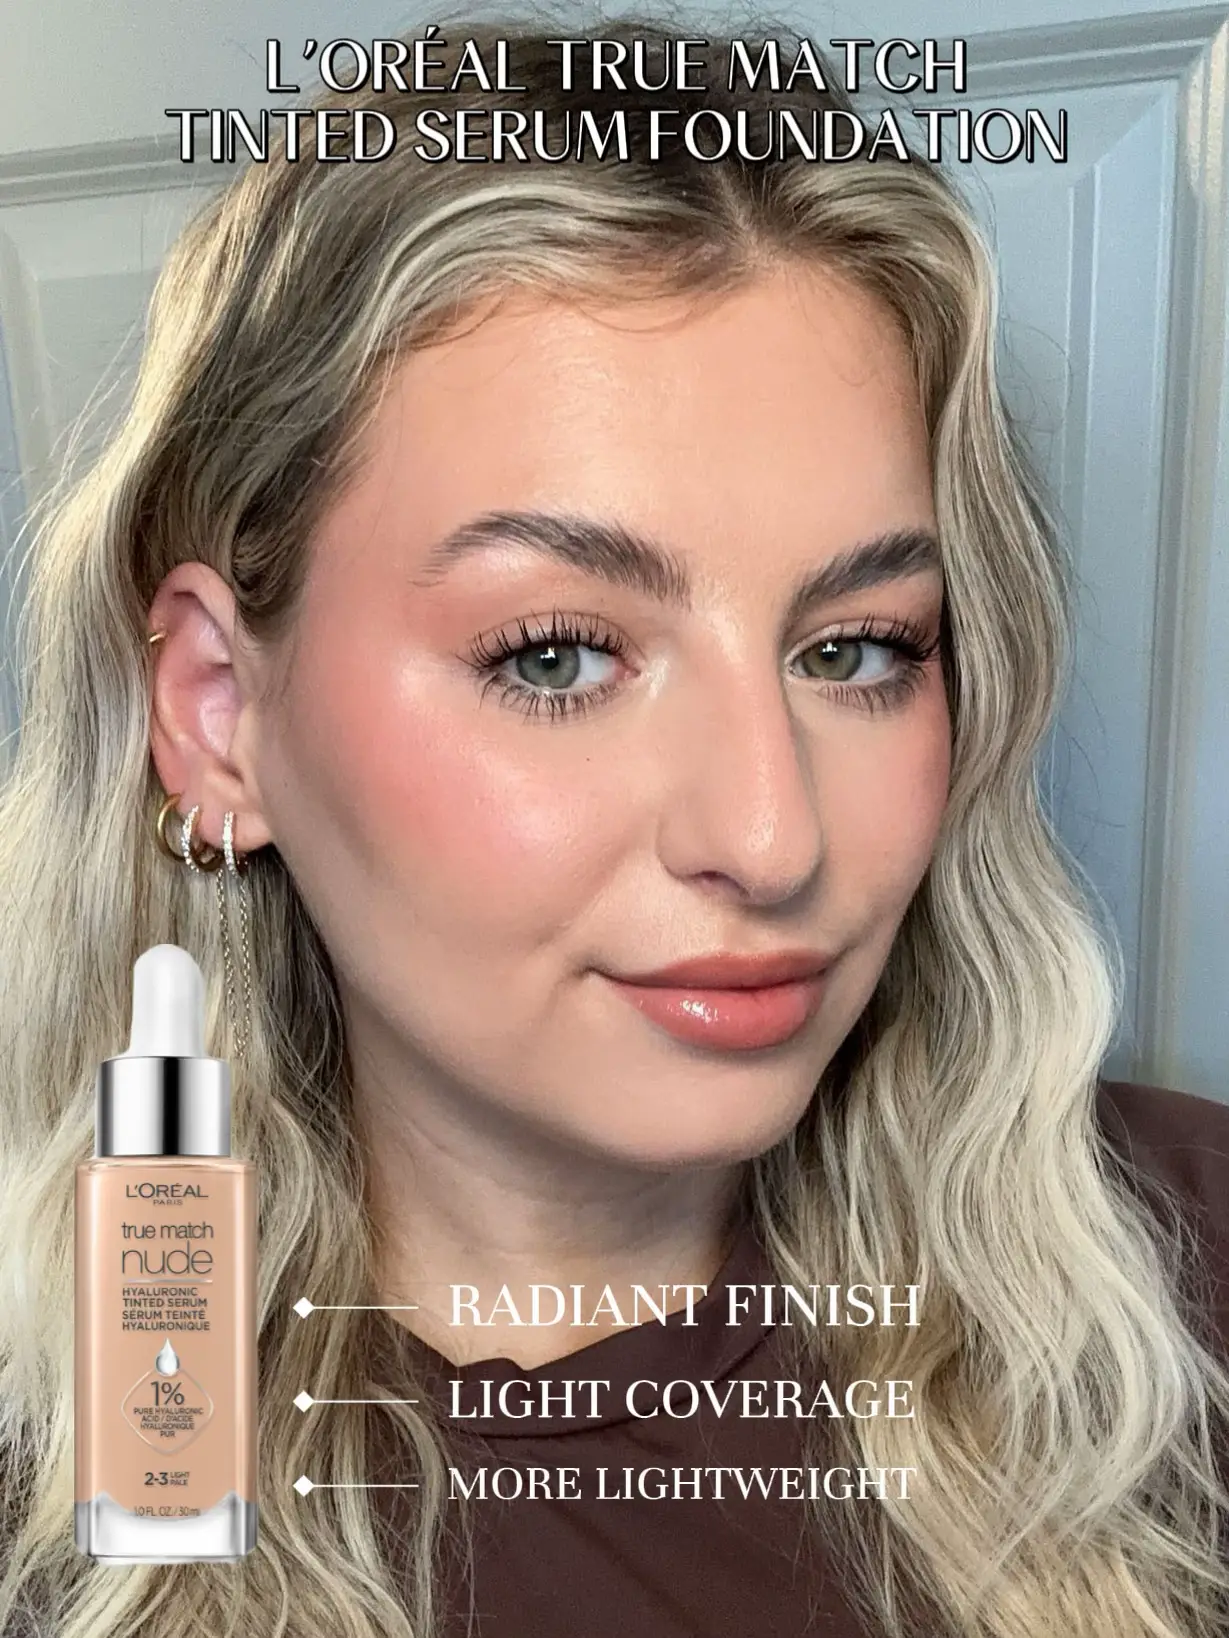 Battle of the Skin Tints: L'Oreal True Match vs Maybelline Super